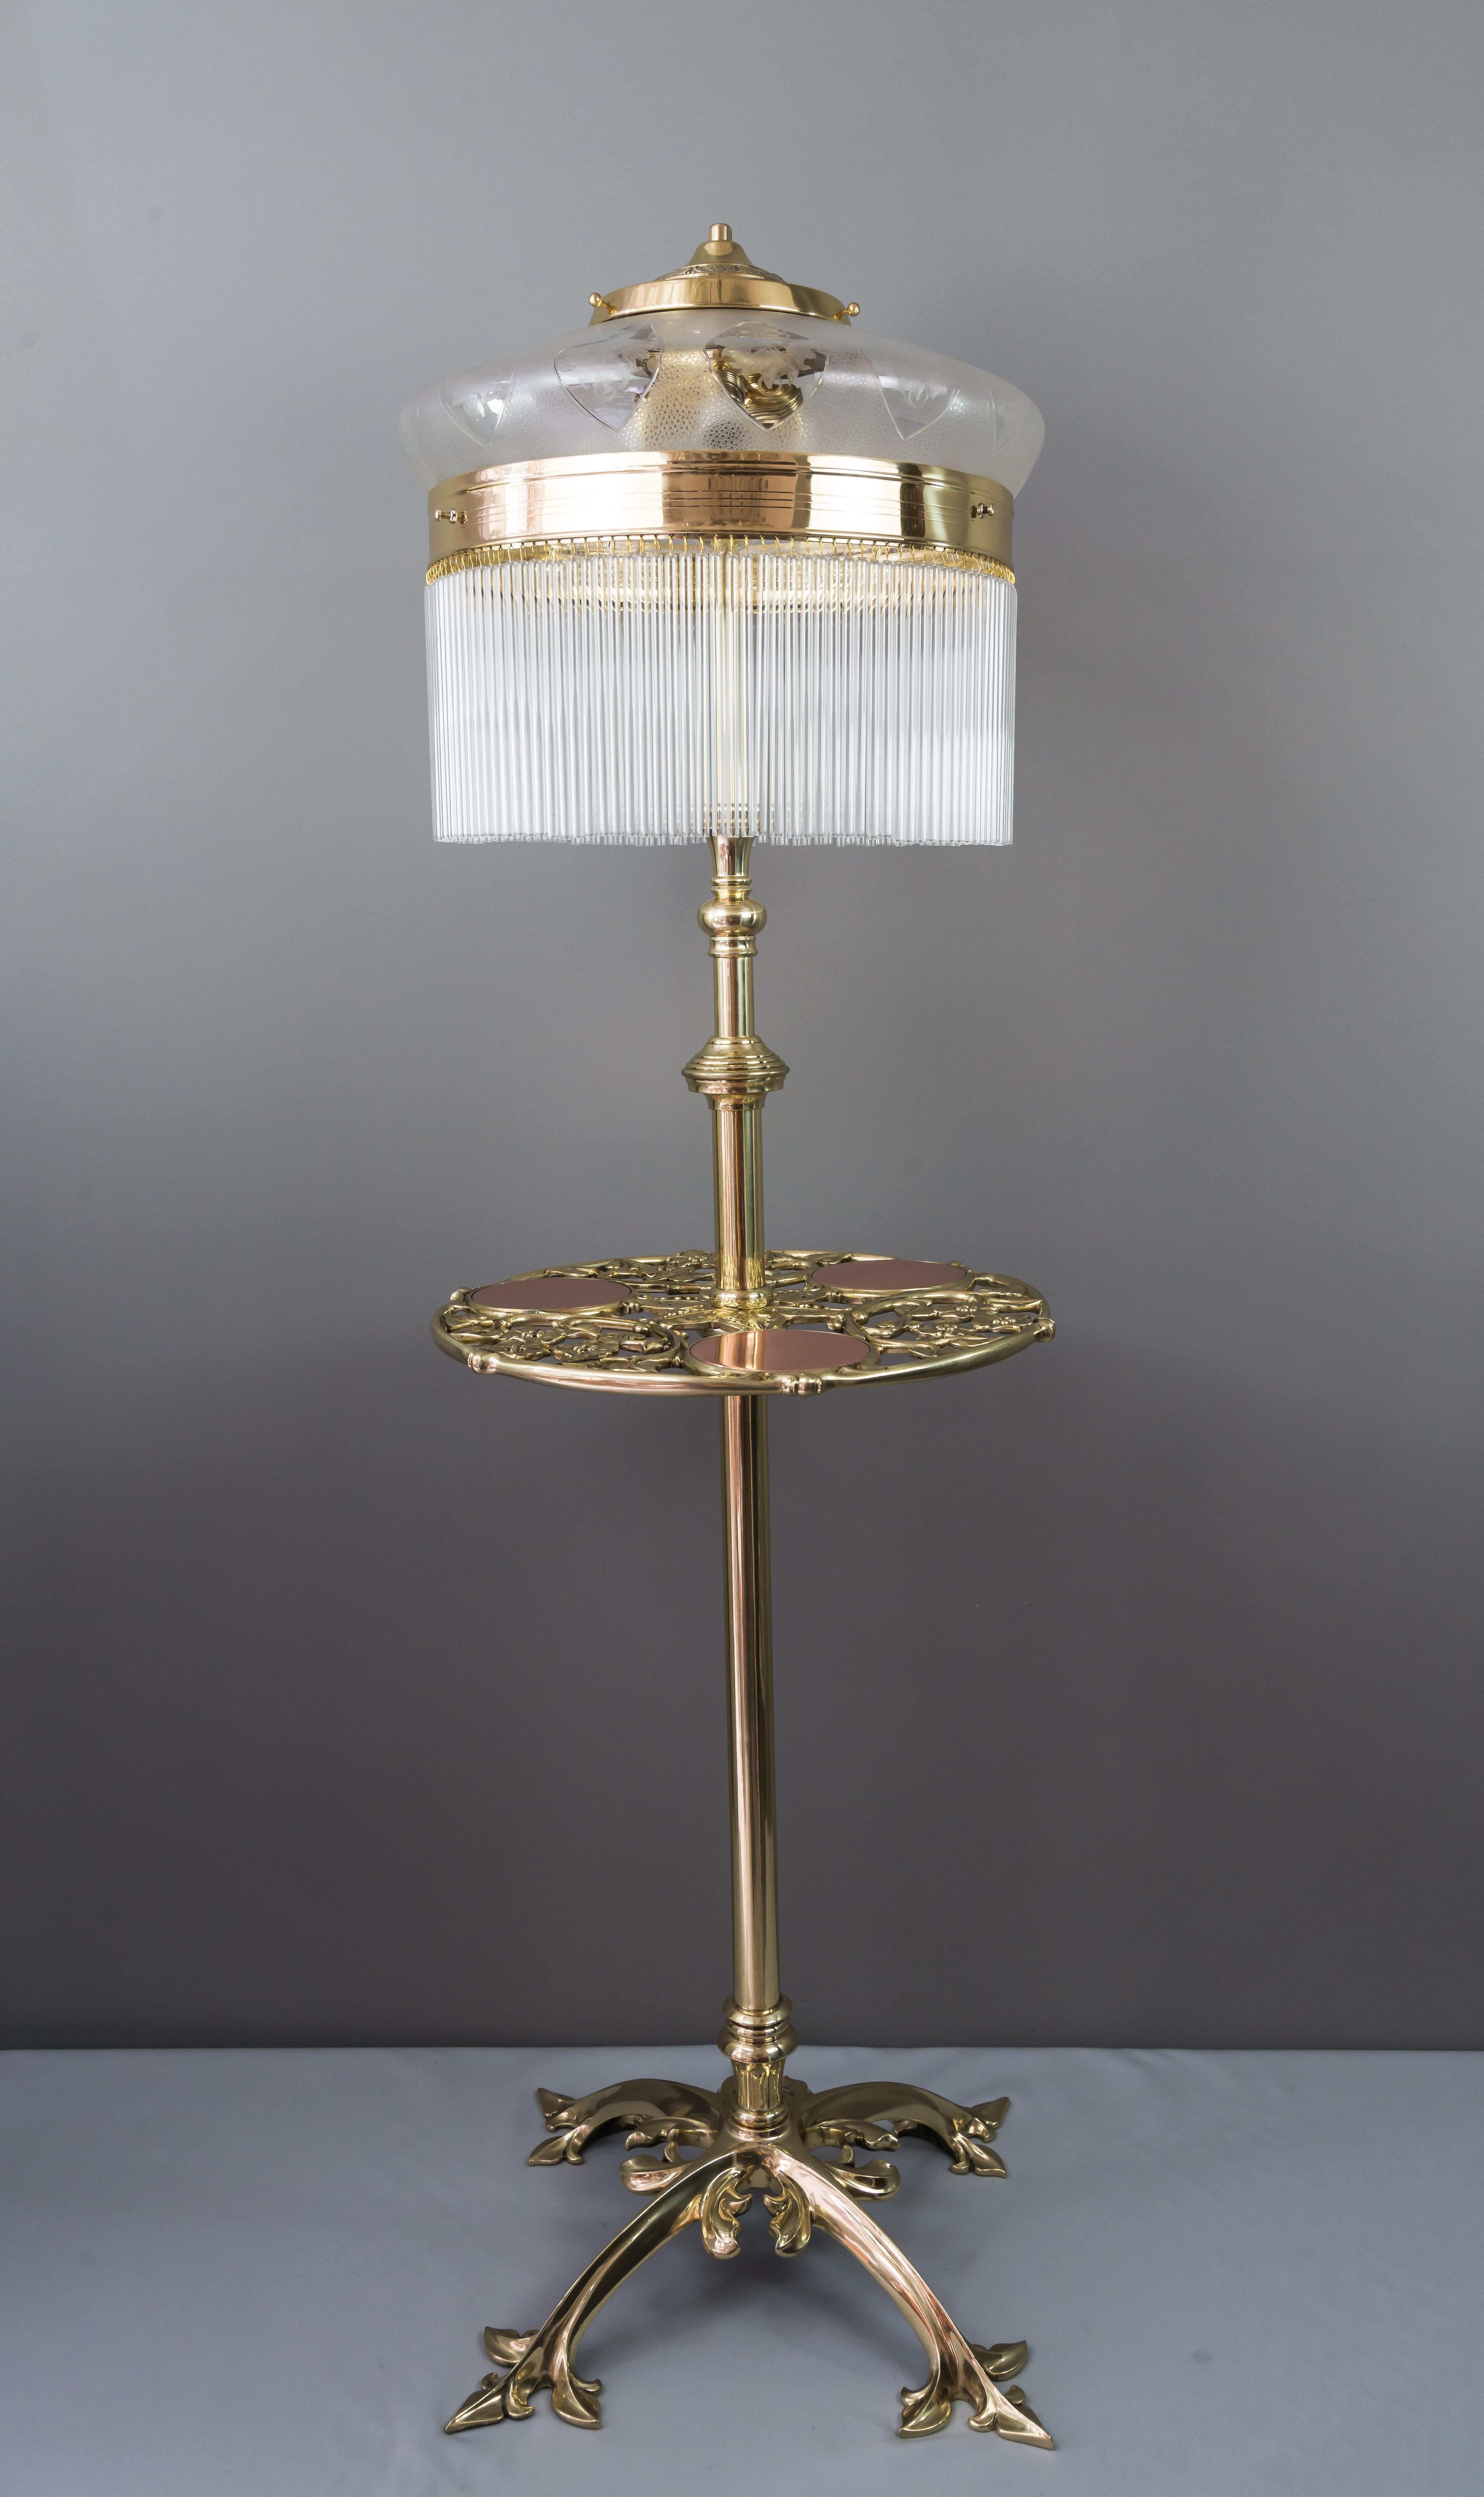 Adjustable Jugendstil floor lamp with original antique glass shade and 3 copper glass holding plates circa 1908.
Polished and stove enameled brass and copper.
High is extendable from 130cm - 180cm.